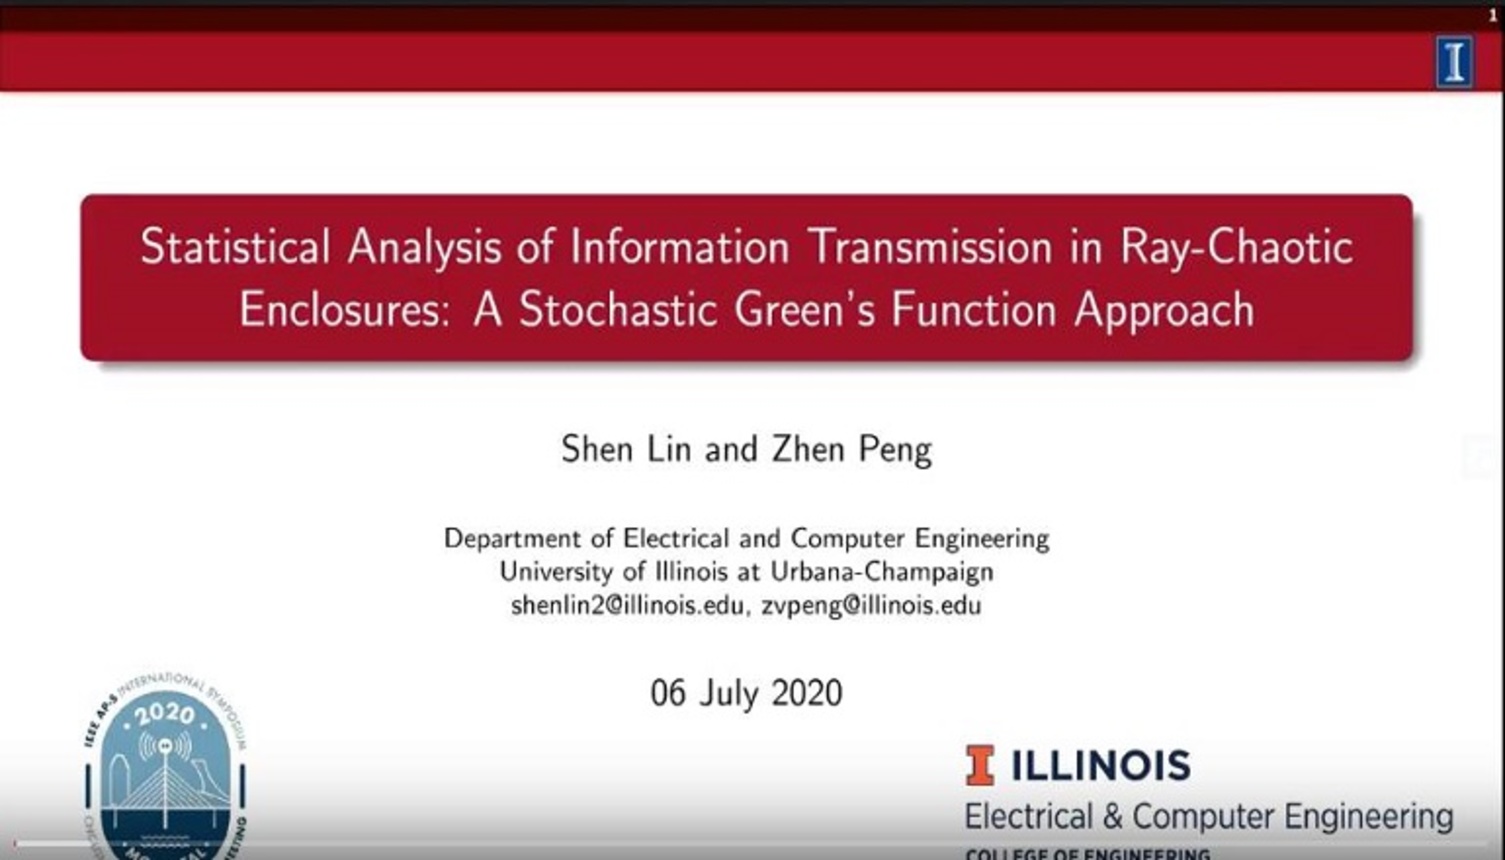 Statistical Analysis of Information Transmission in Ray-Chaotic Enclosures: A Stochastic Green's Function Approach Video